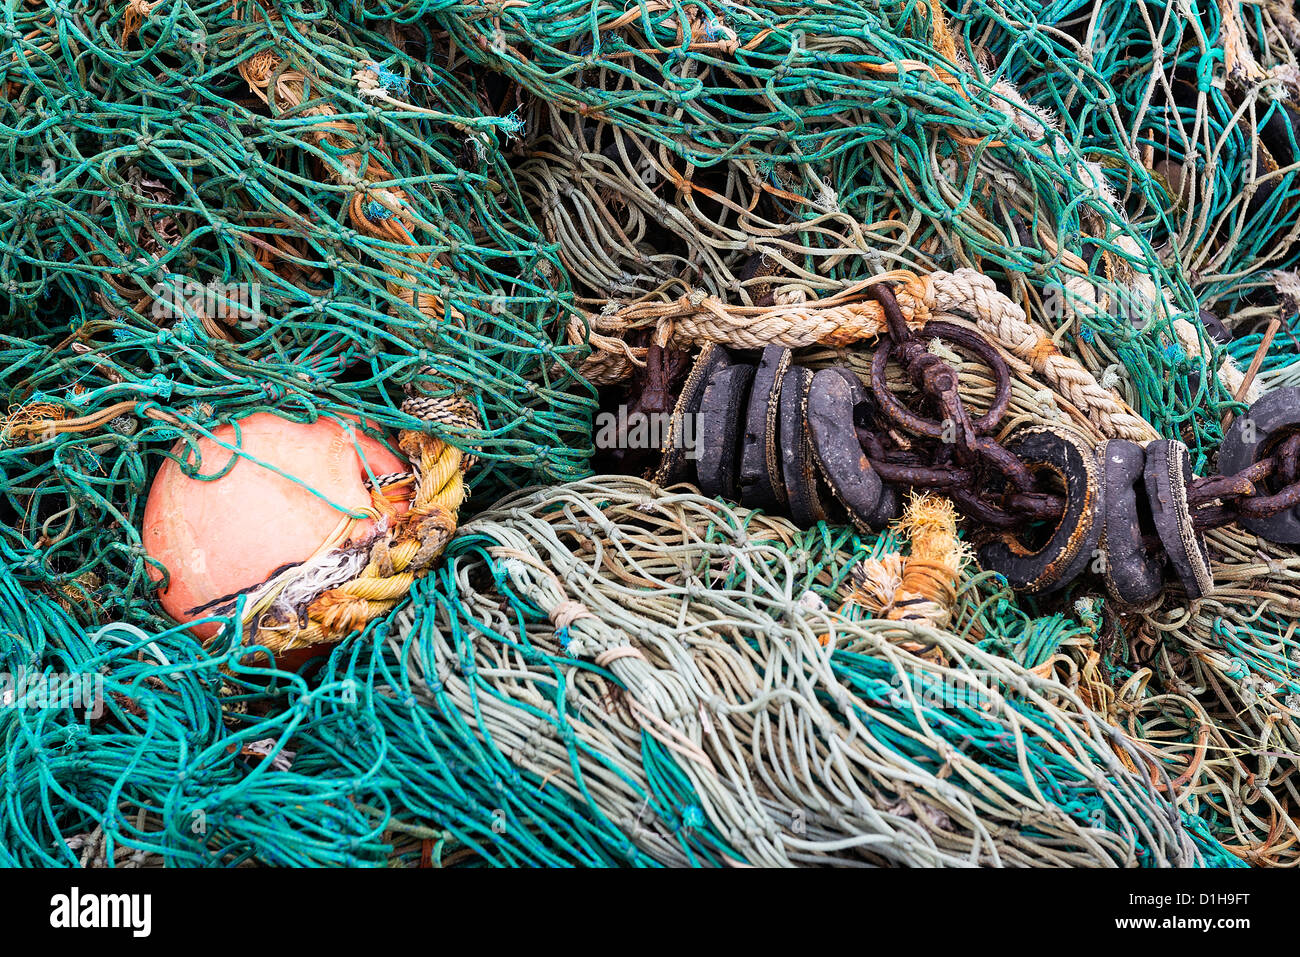 Commercial fishing nets. Stock Photo